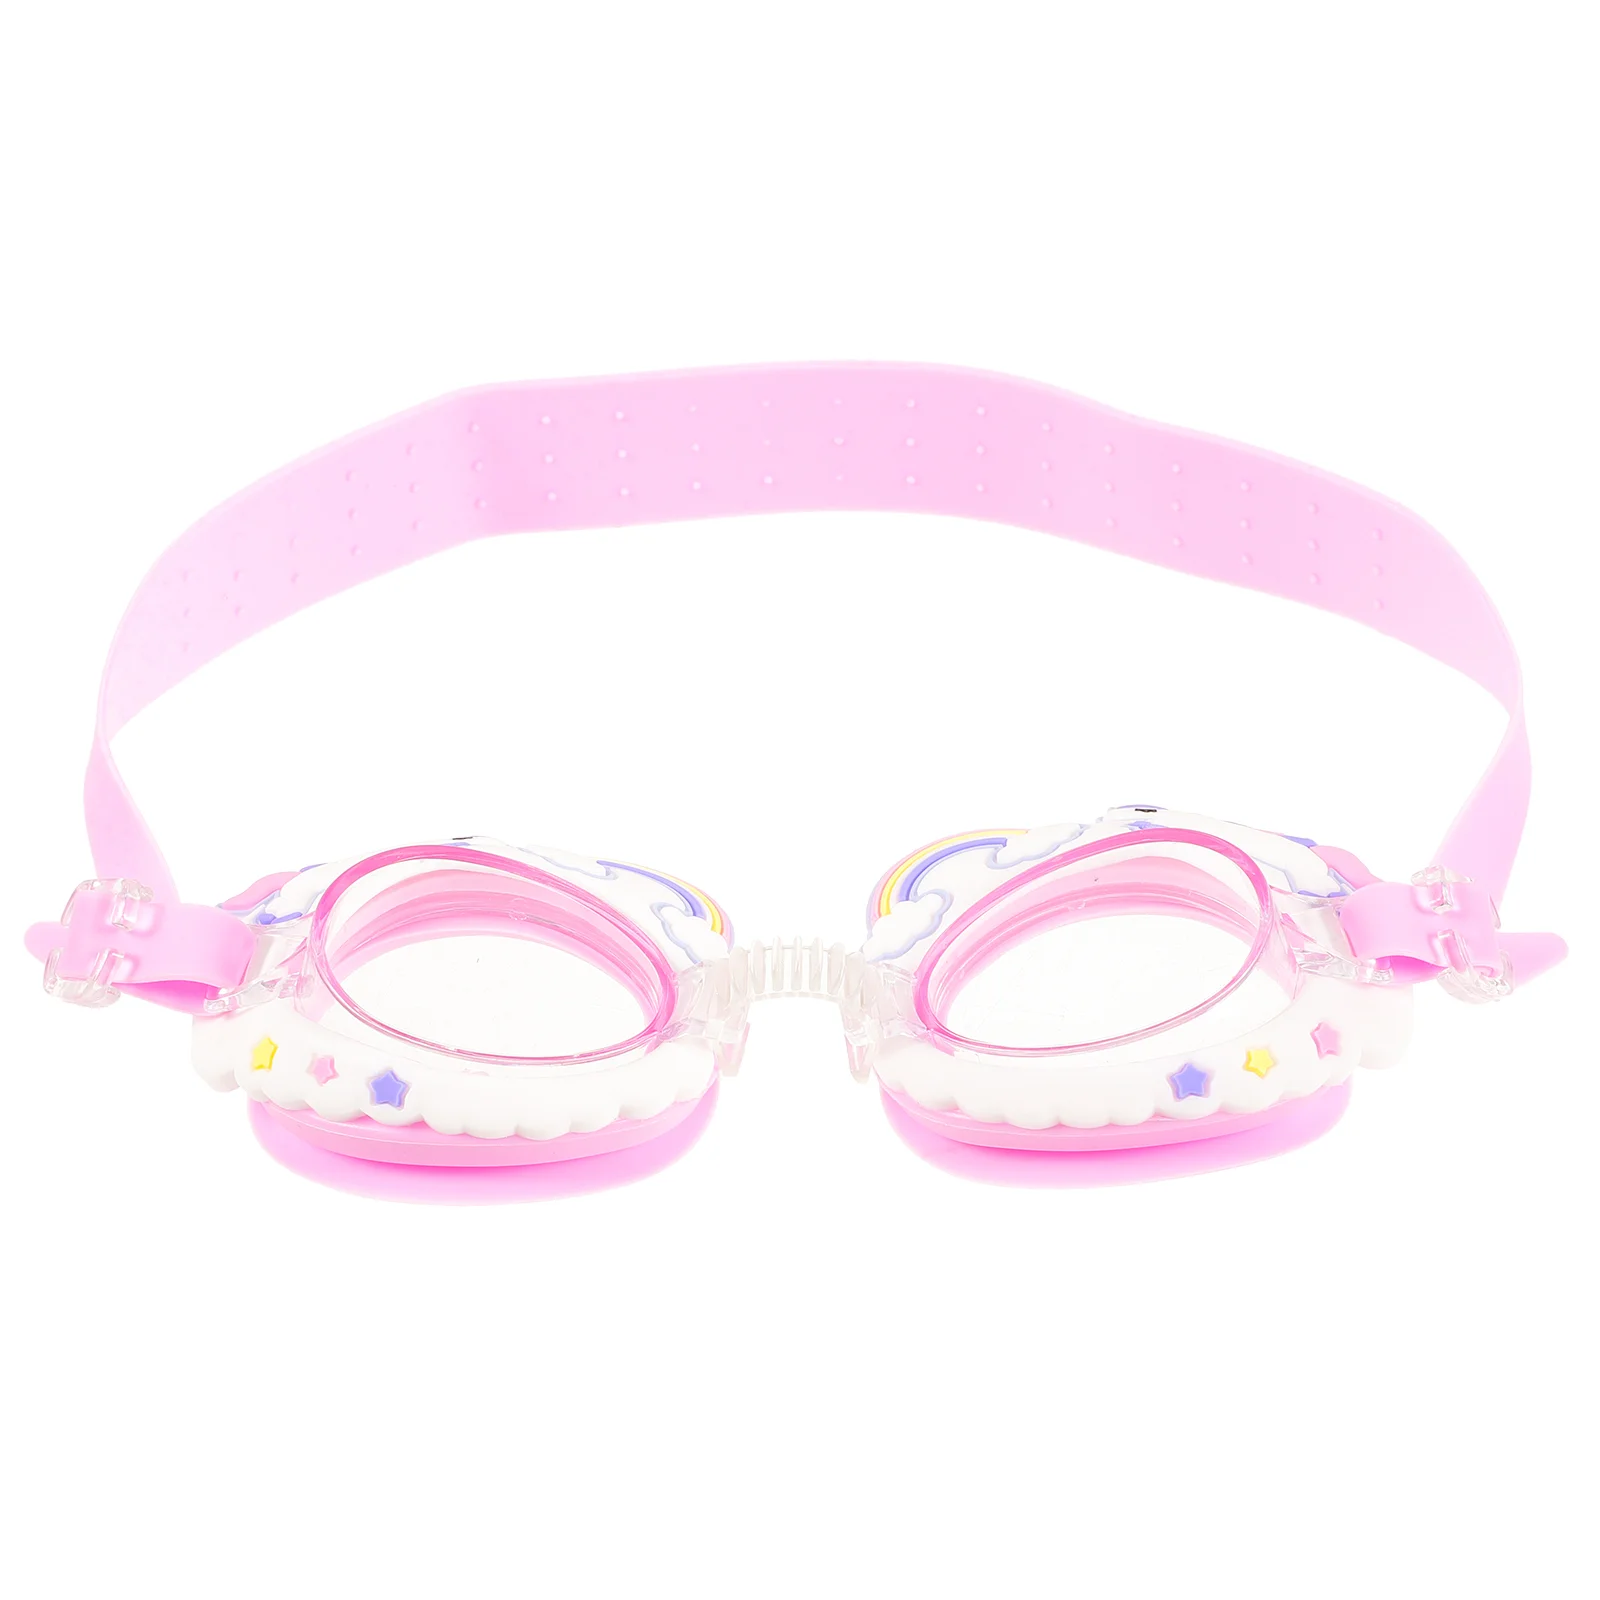 Children's Swimming Goggles Girls' Cute Cartoon Animals Waterproof Pink Rainbow Horse Toddler for Kids Silica Gel baby girls sandals 2019 summer kids pink white navy classic for little girls toddler shoes handsewing chaussure plain sandals